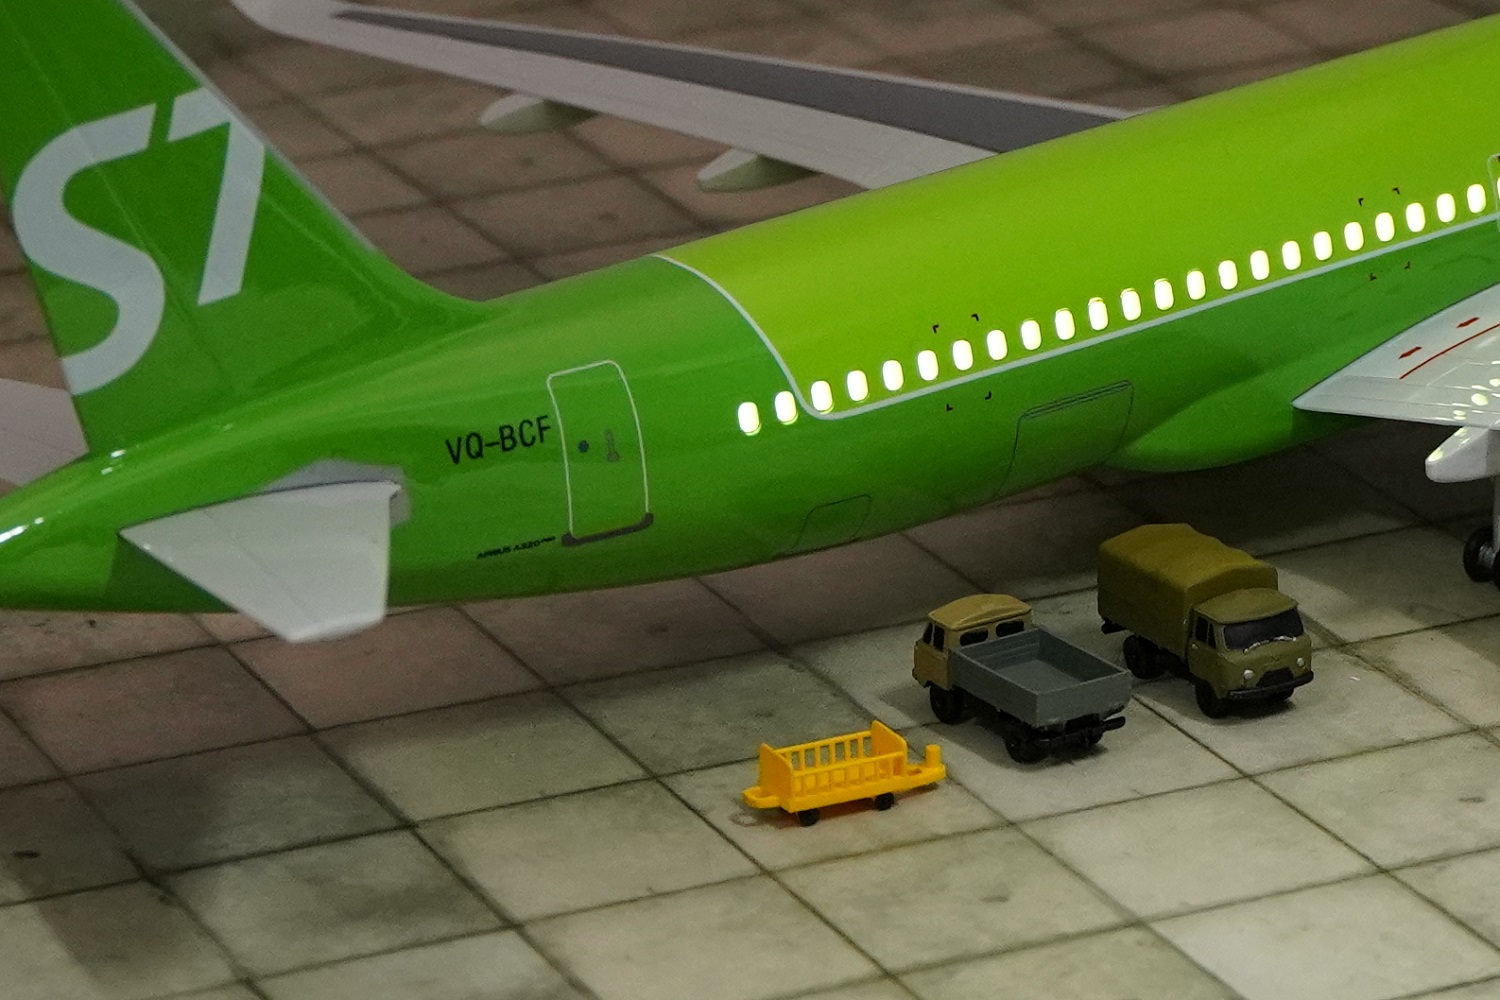   Airbus A320 Neo,  S7 Airlines .    .  # 5 hobbyplus.ru